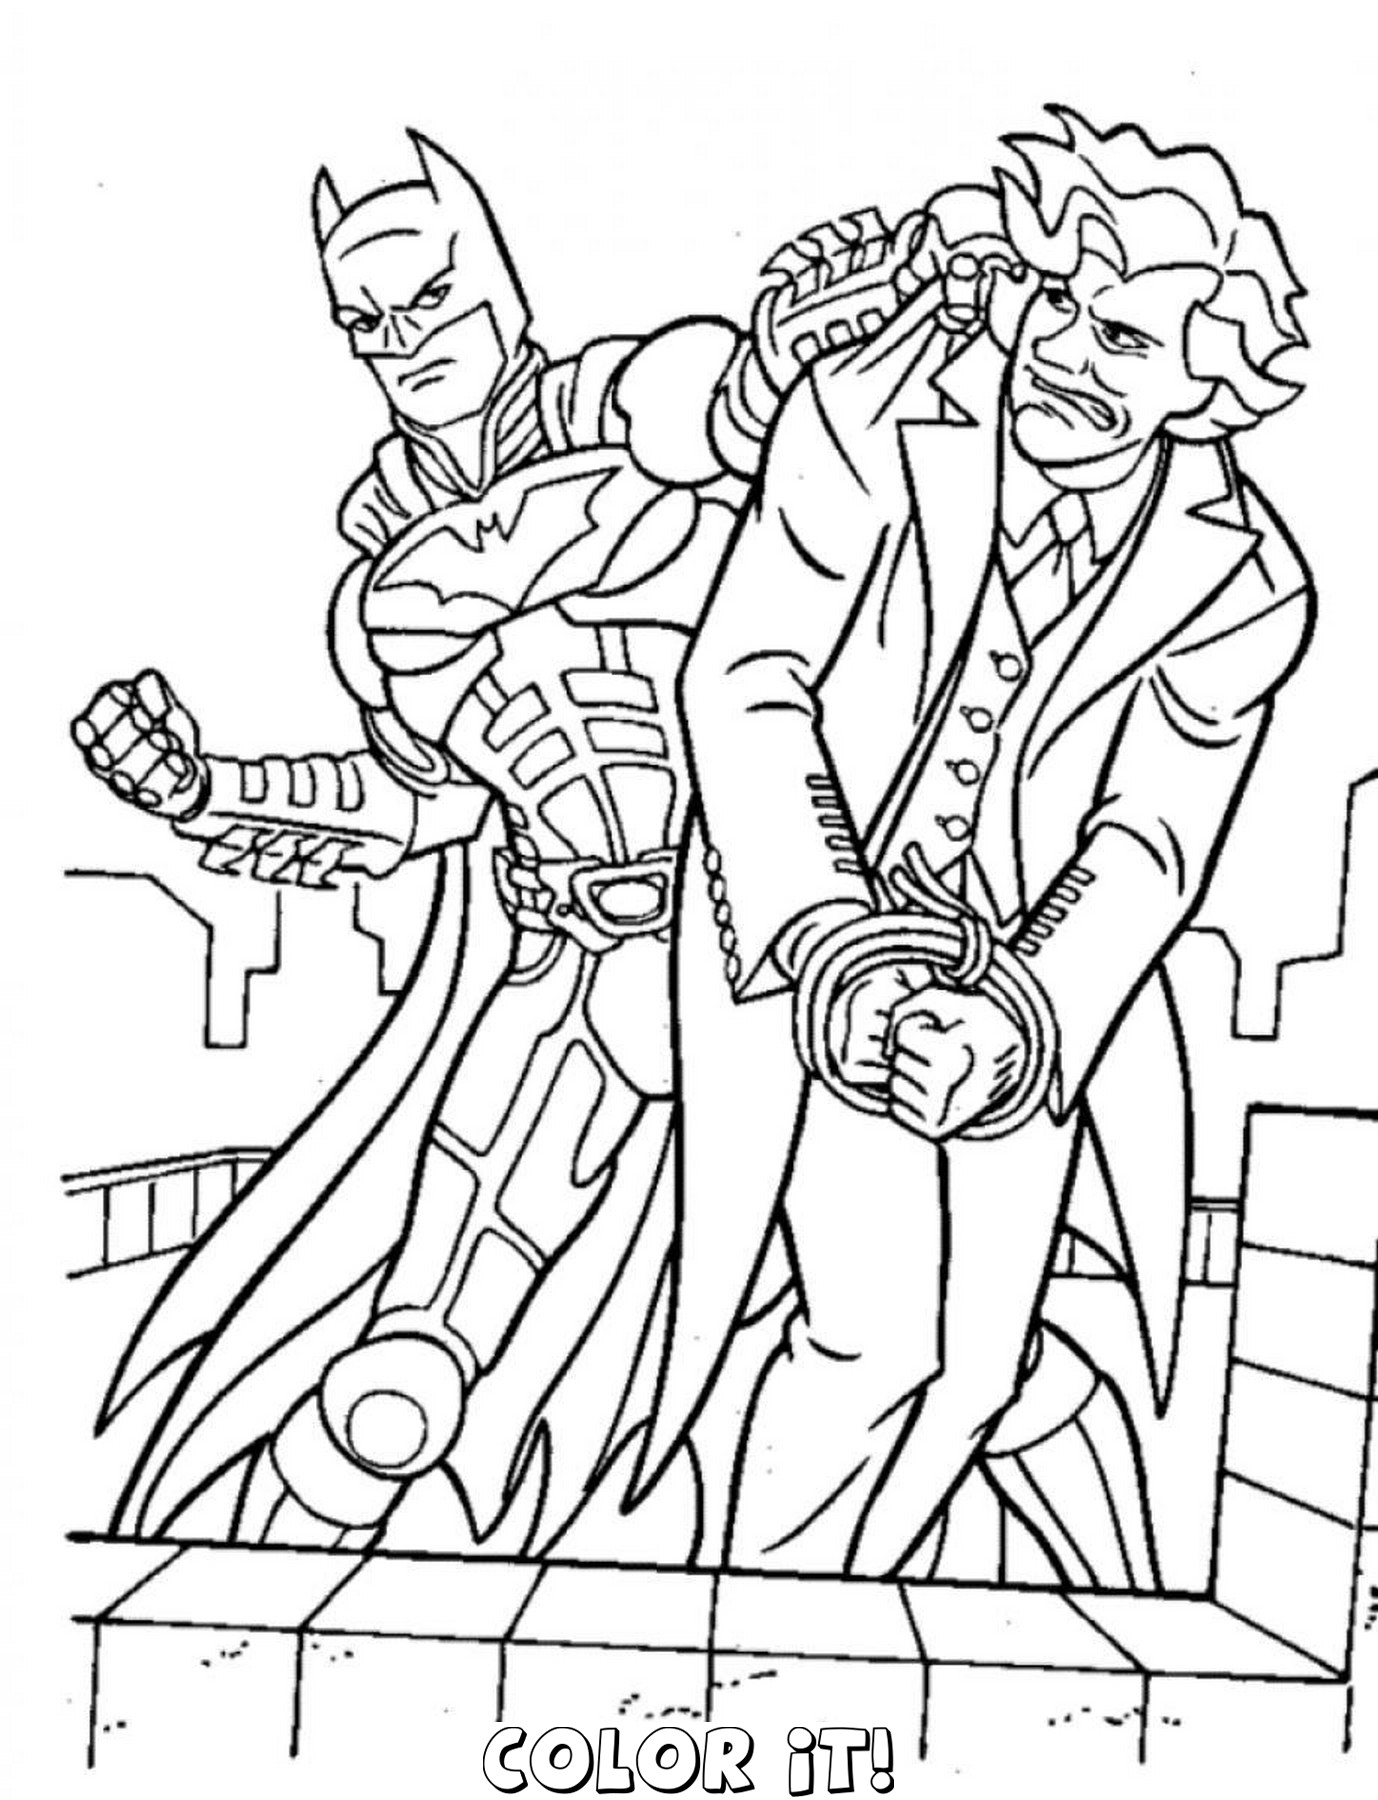 Free Printable Batman Coloring Pages For Kids Super Hero Costumes - Free Printable Batman Coloring Pages